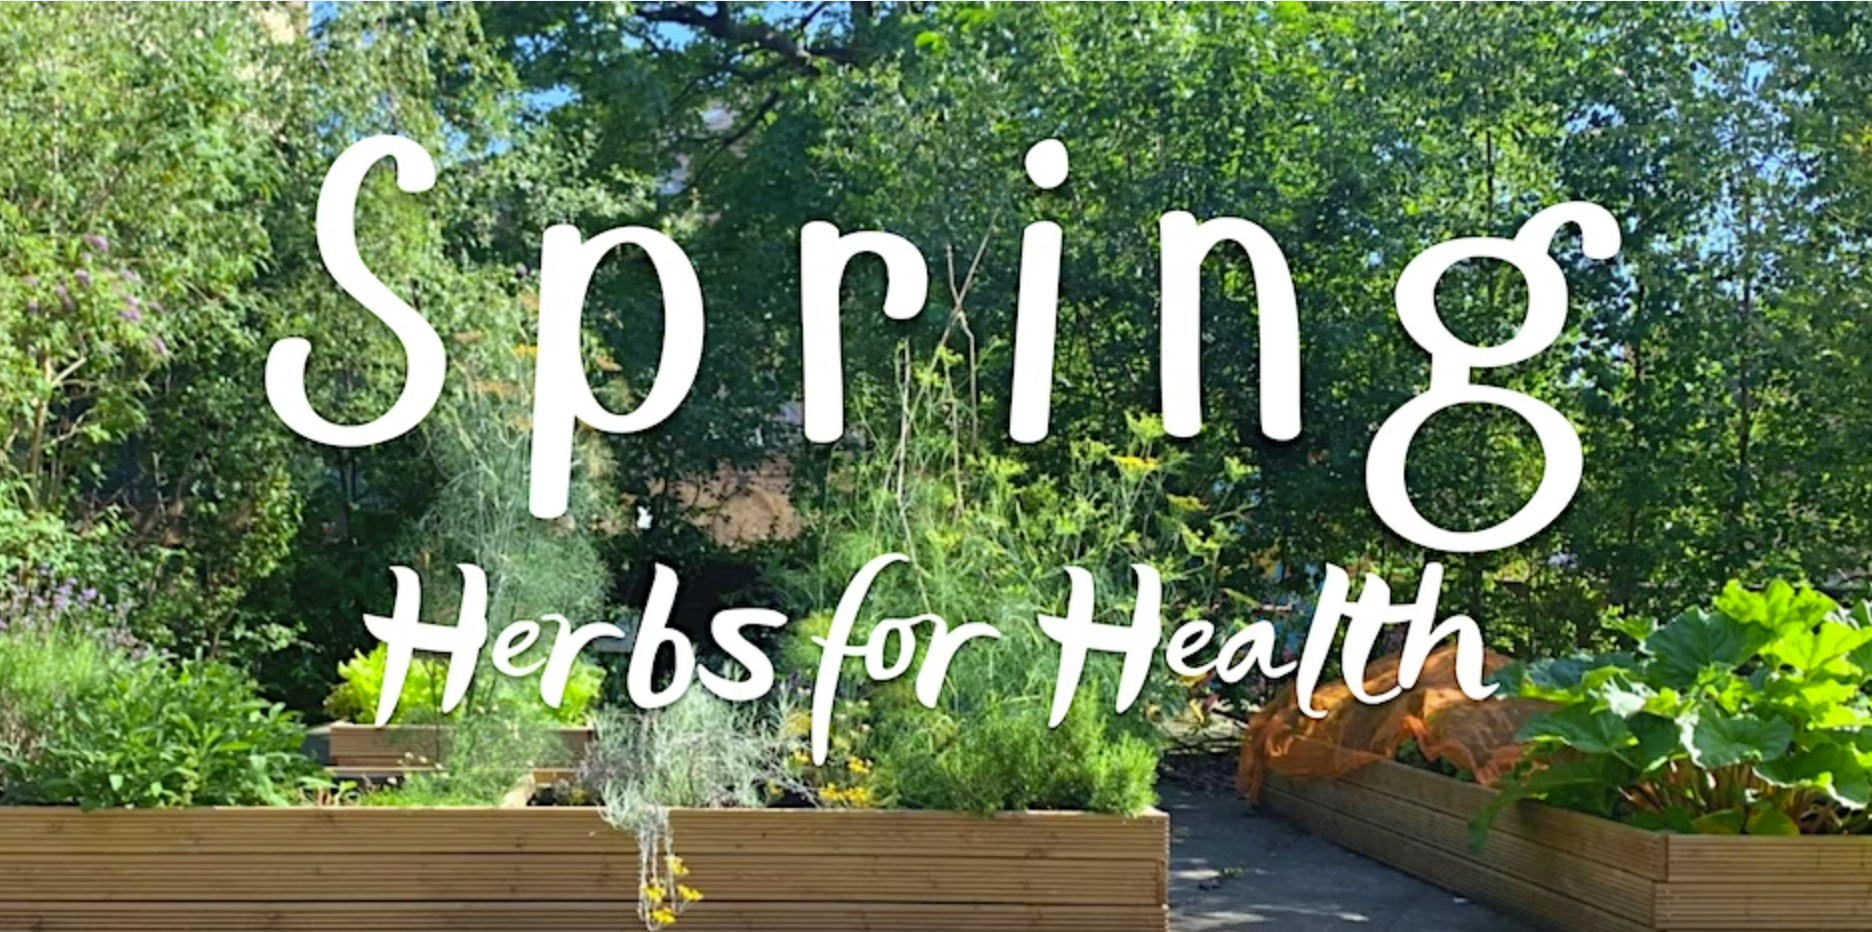 an image of a garden with growing beds with 'spring herbs for health' written over it